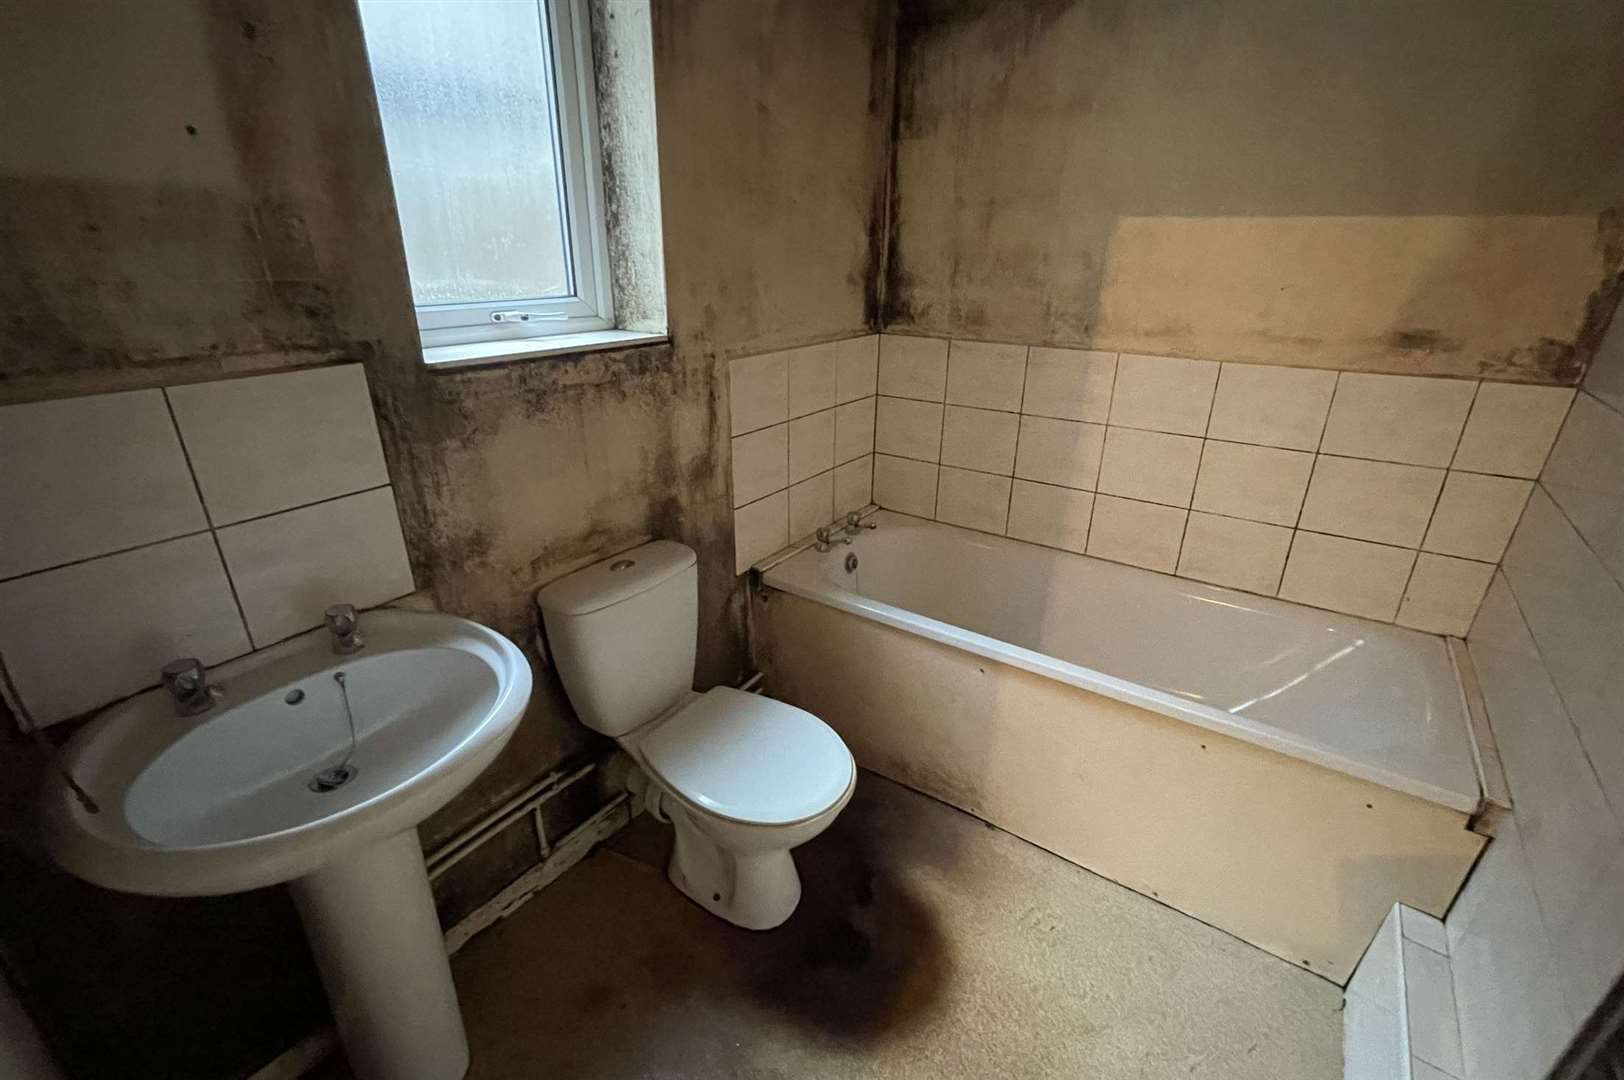 Ashford cleaning couple James Kilburn and Kimberley Trevett brought the disgusting Kent property back from the brink. Photo: SWNS